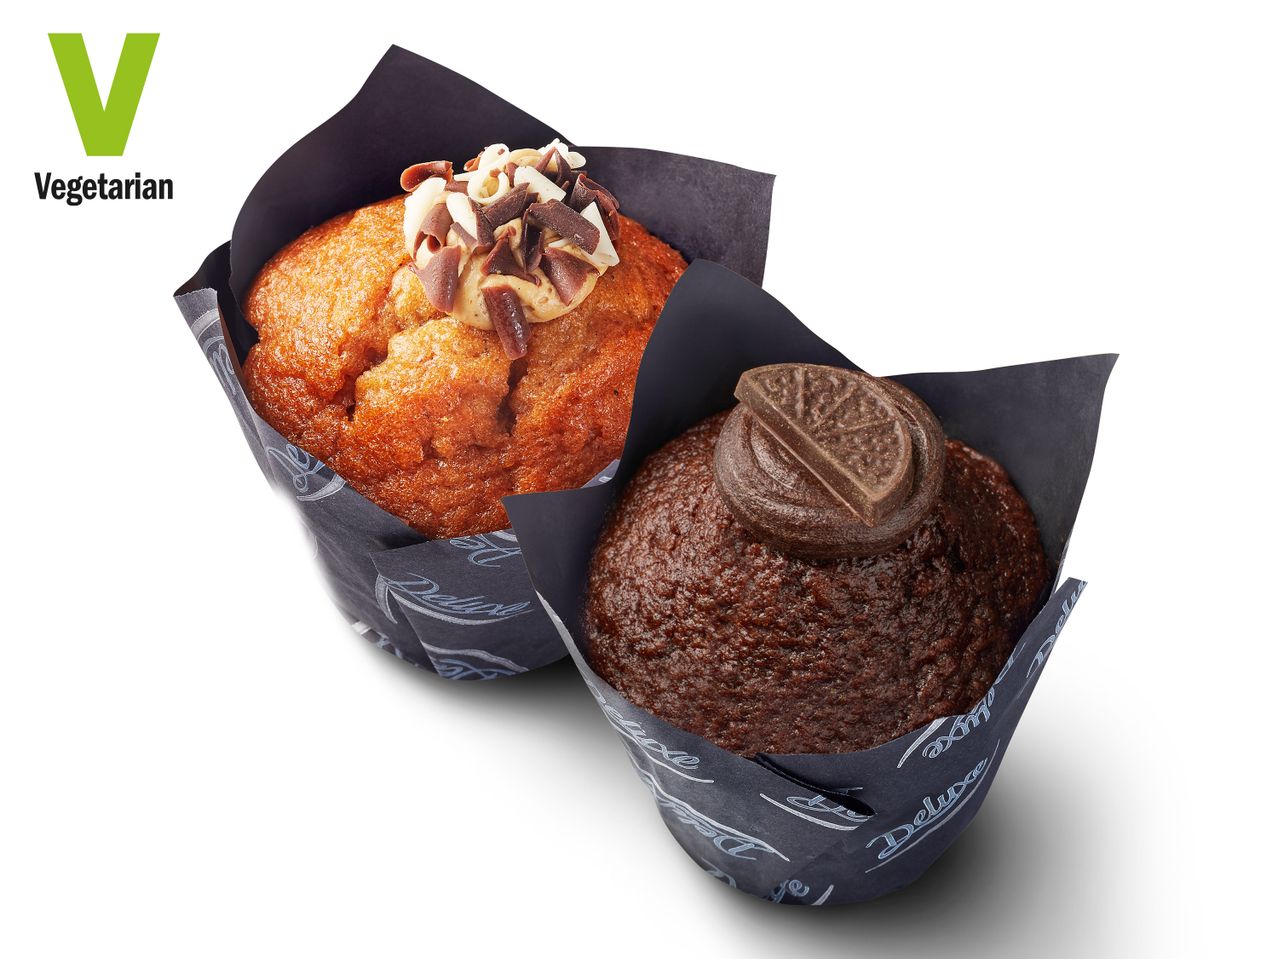 Go to full screen view: Premium Filled Muffins - Chocolate Orange / Speculoos - Image 1